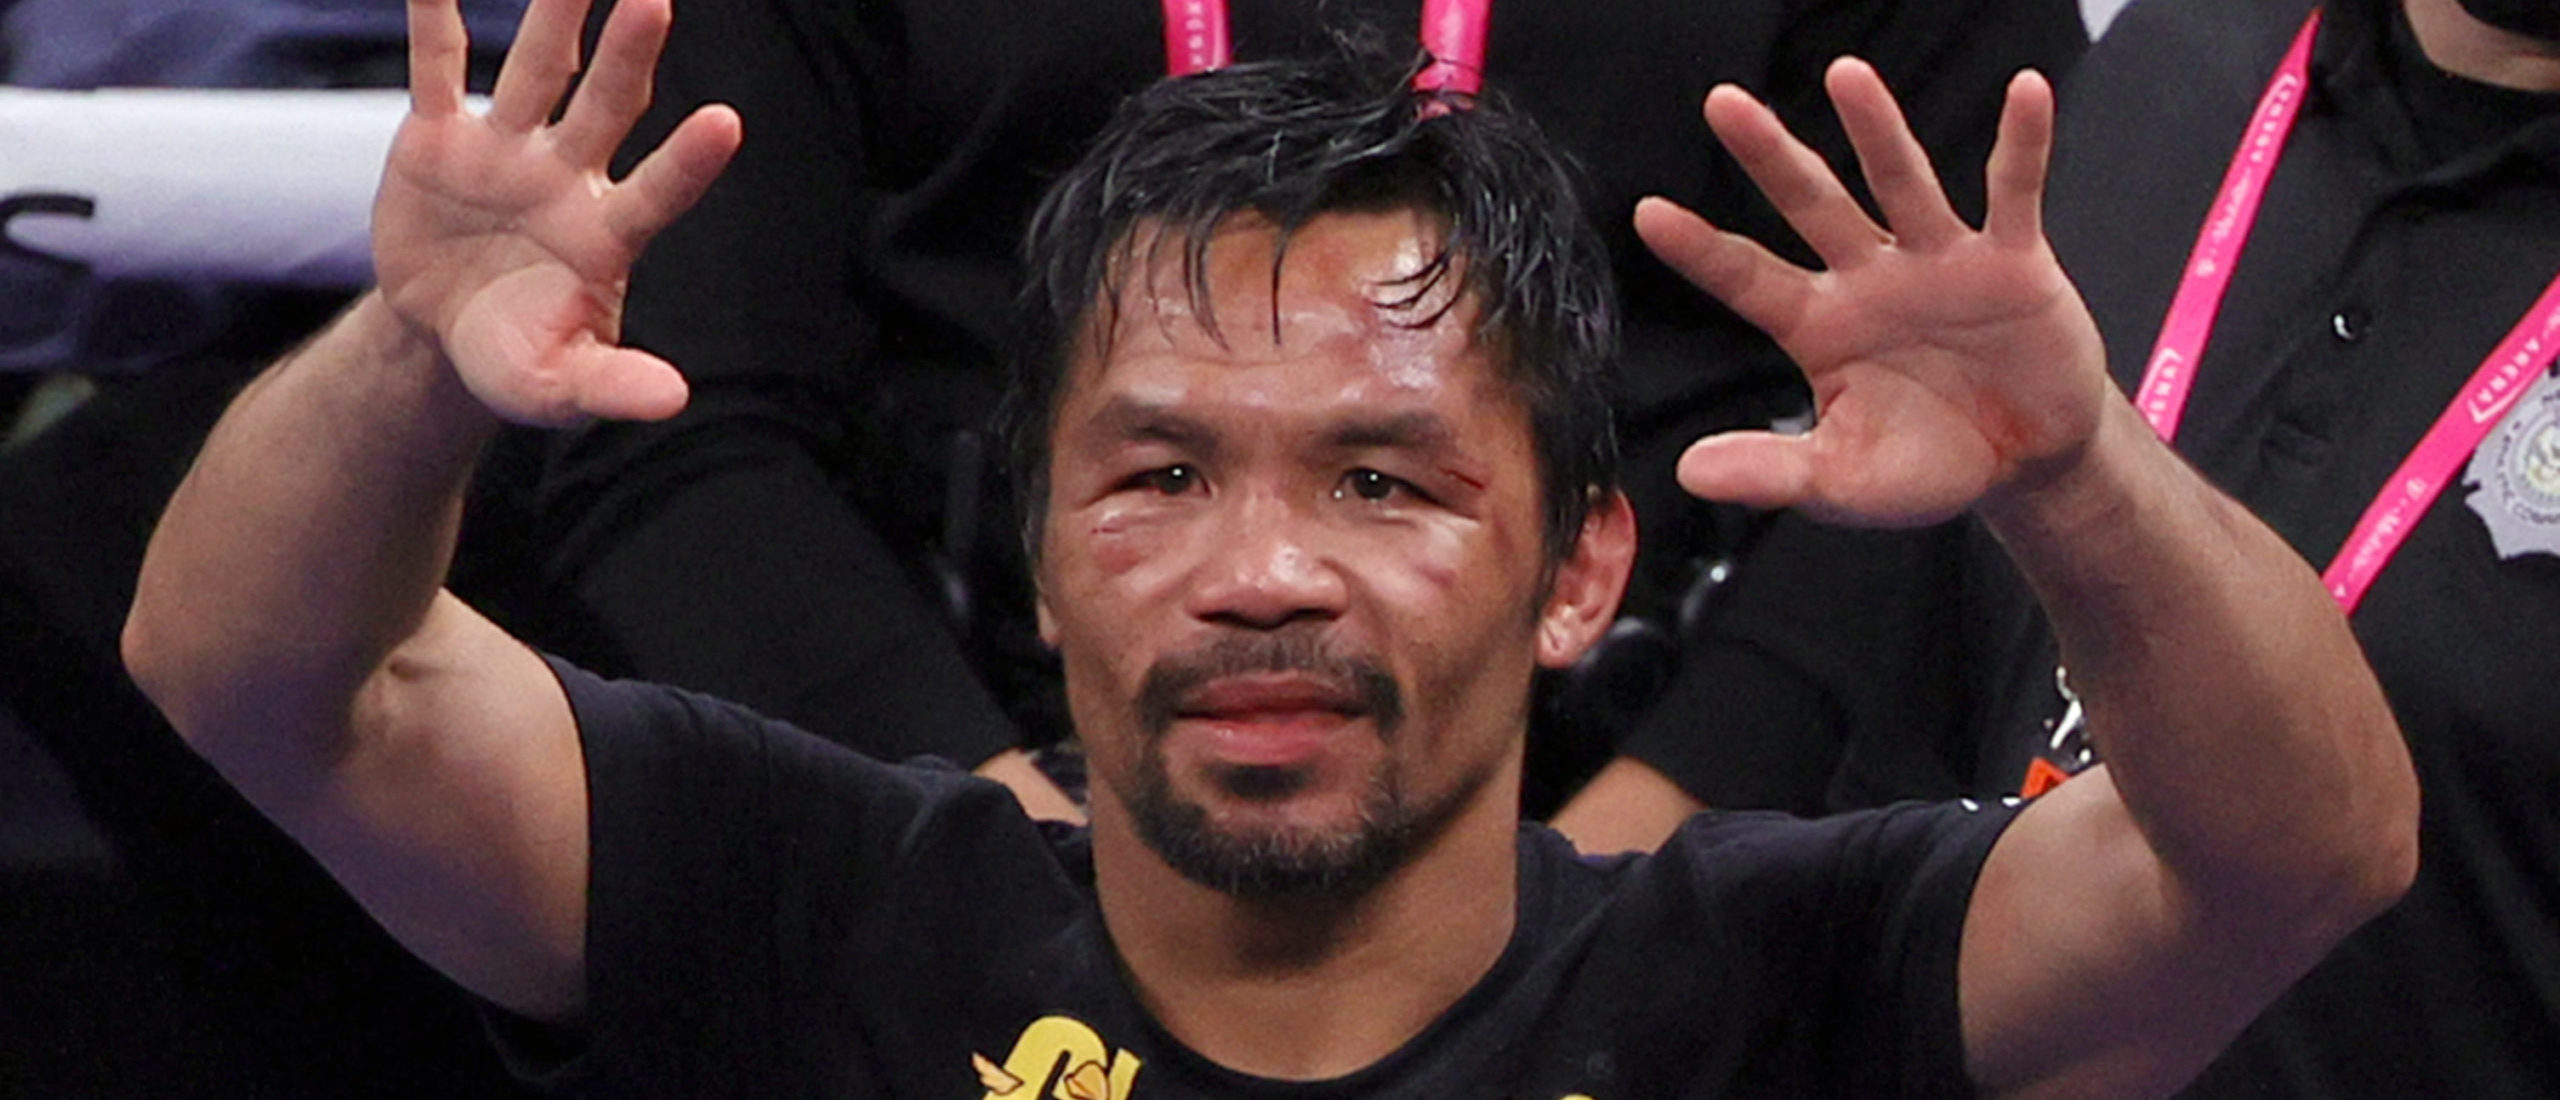 International Olympic Committee Denies Manny Pacquiao’s Bid To Compete At Olympics